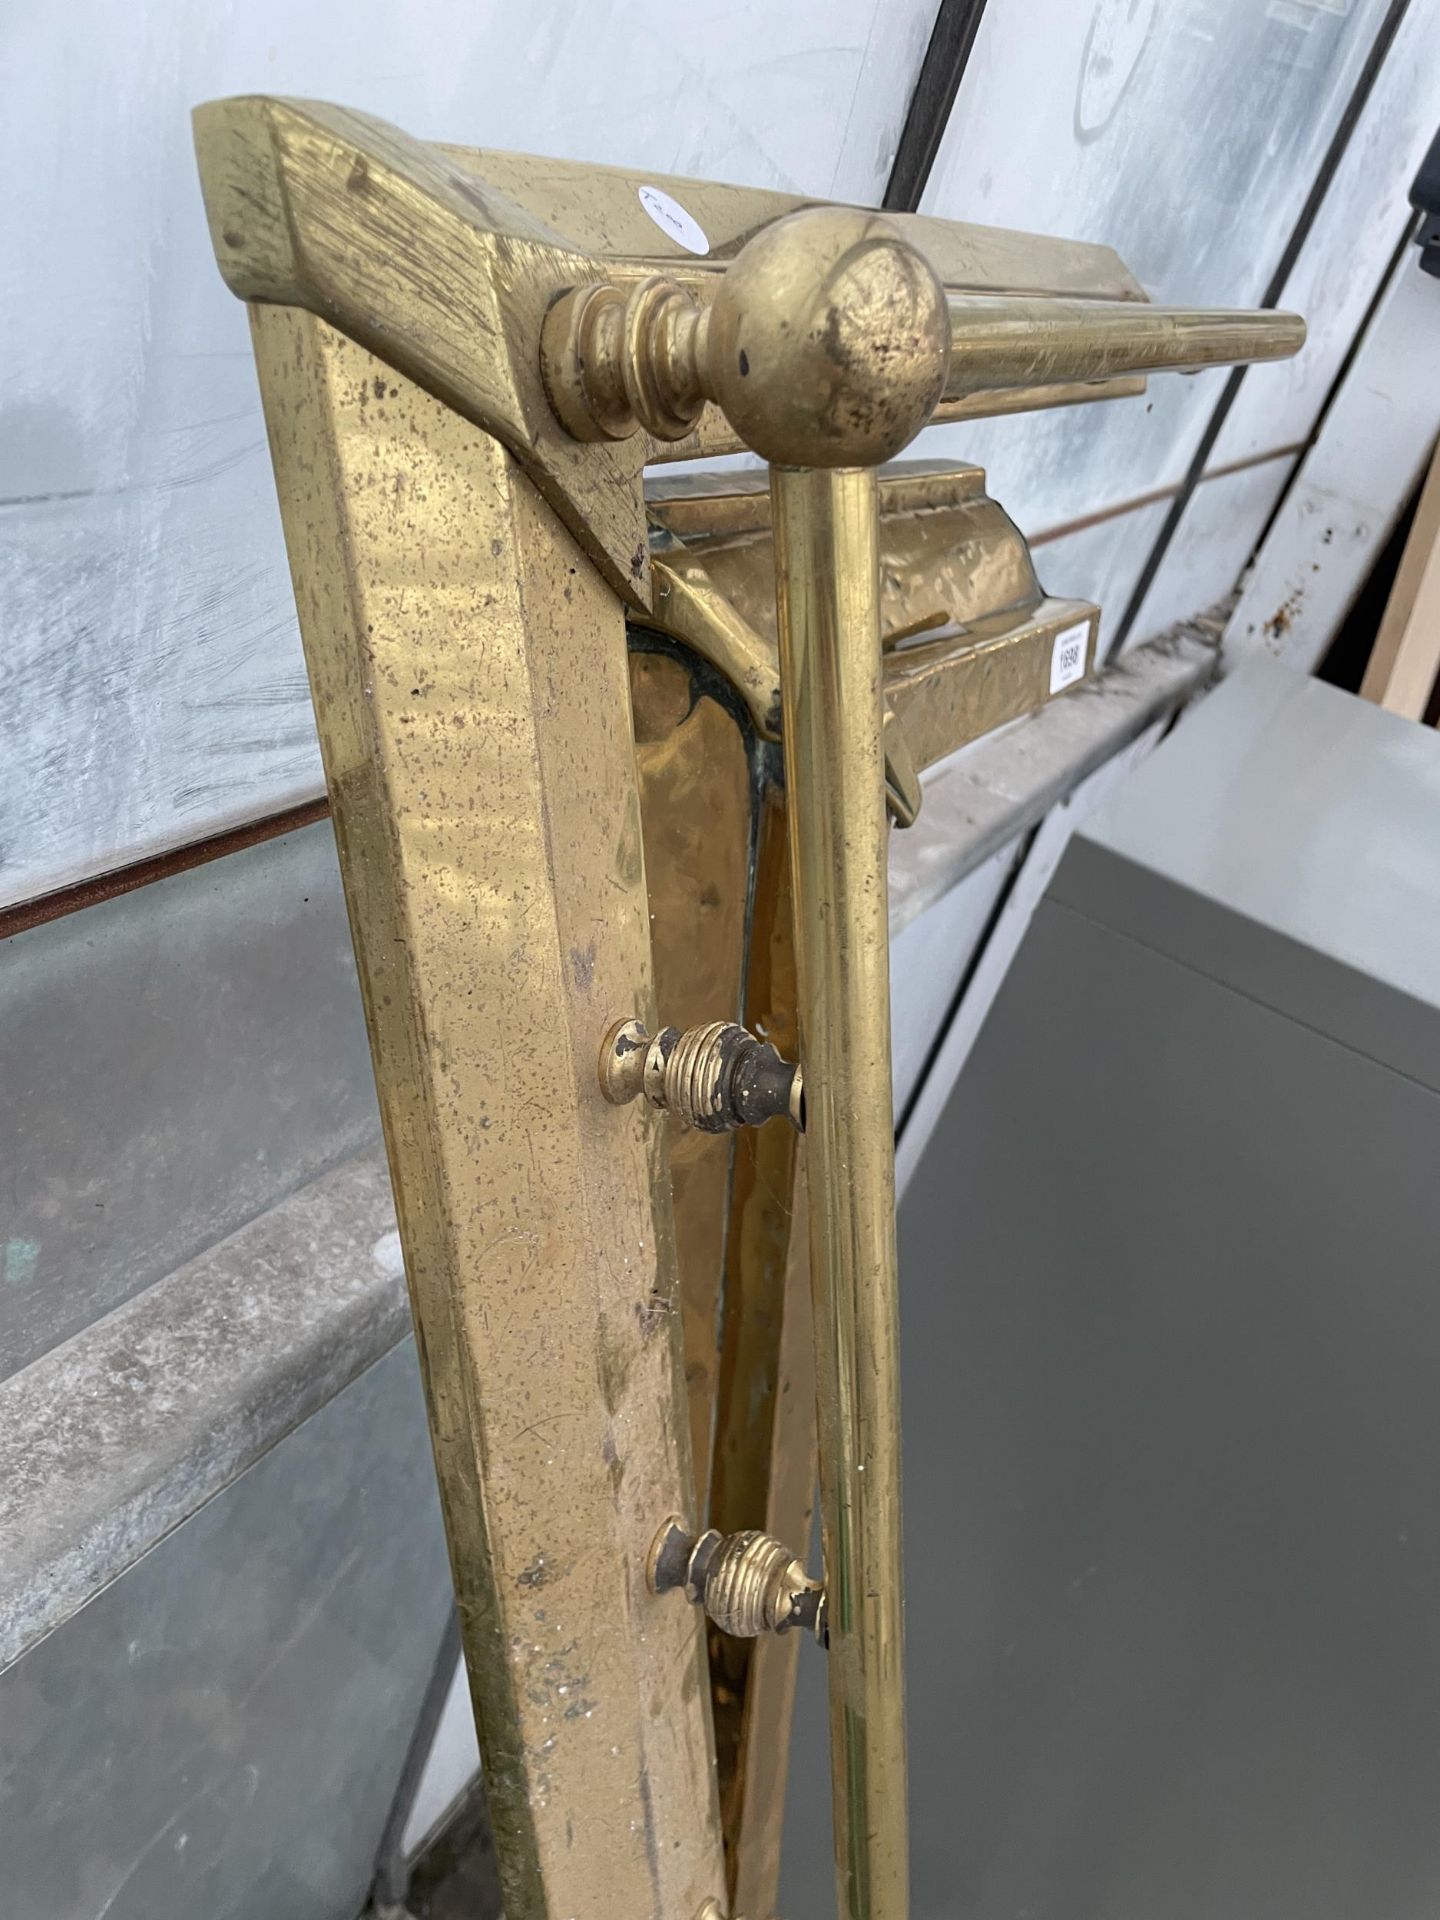 TWO DECORATIVE BRASS FIRE FENDERS - Image 3 of 3